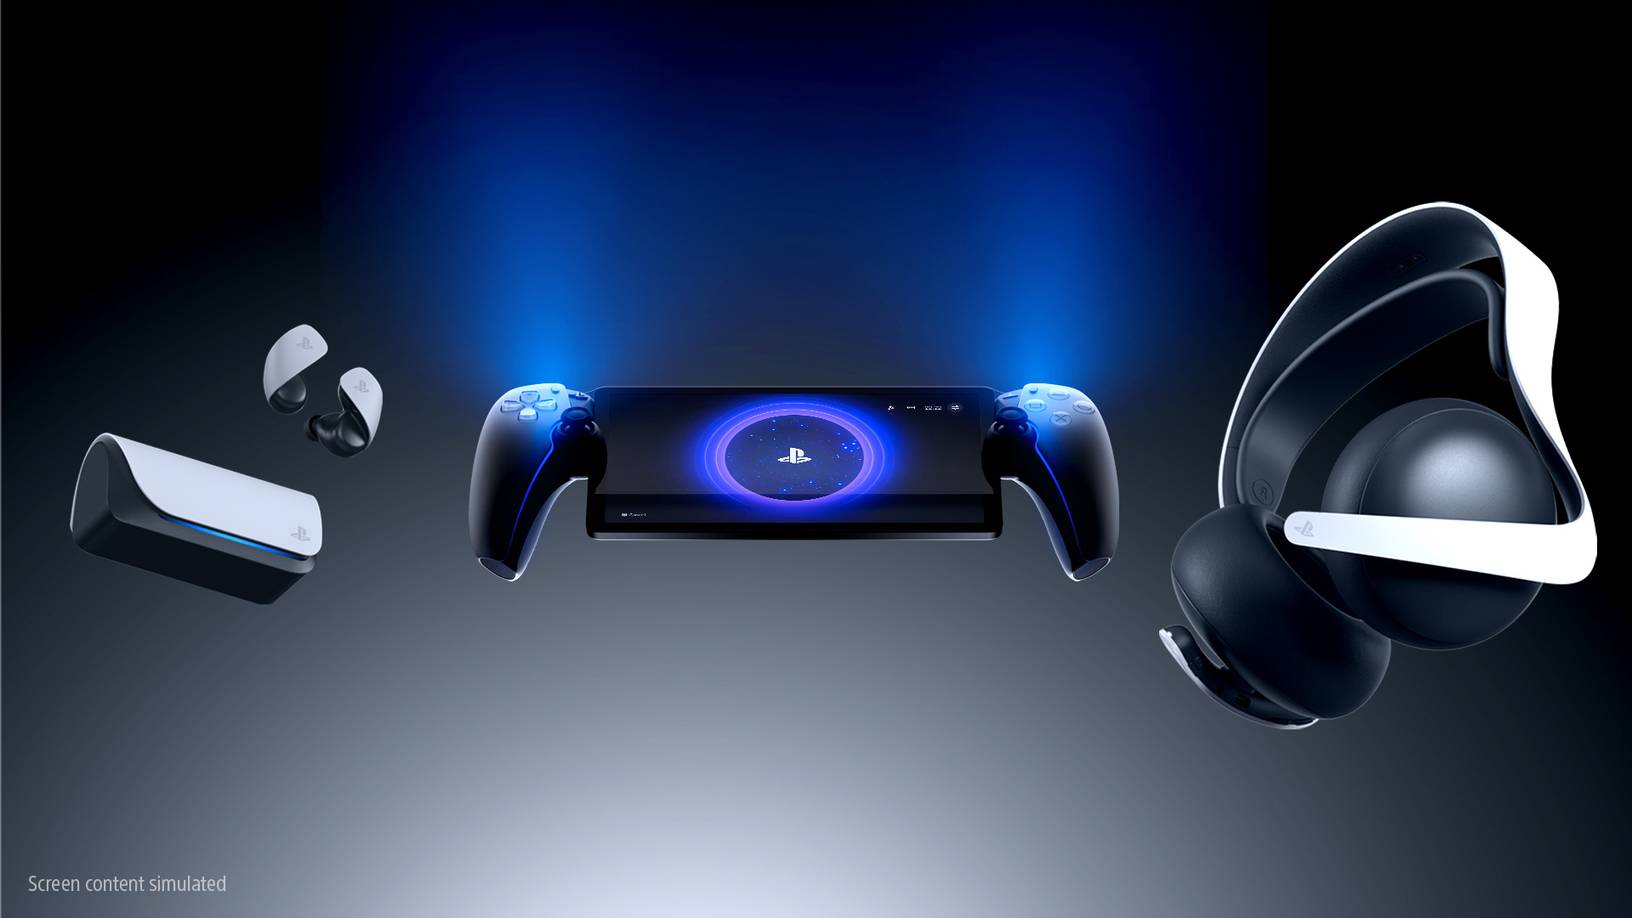 Introducing PlayStation Portal remote, Pulse Explore wireless earbuds,  PlayStation Pulse Elite wireless headset